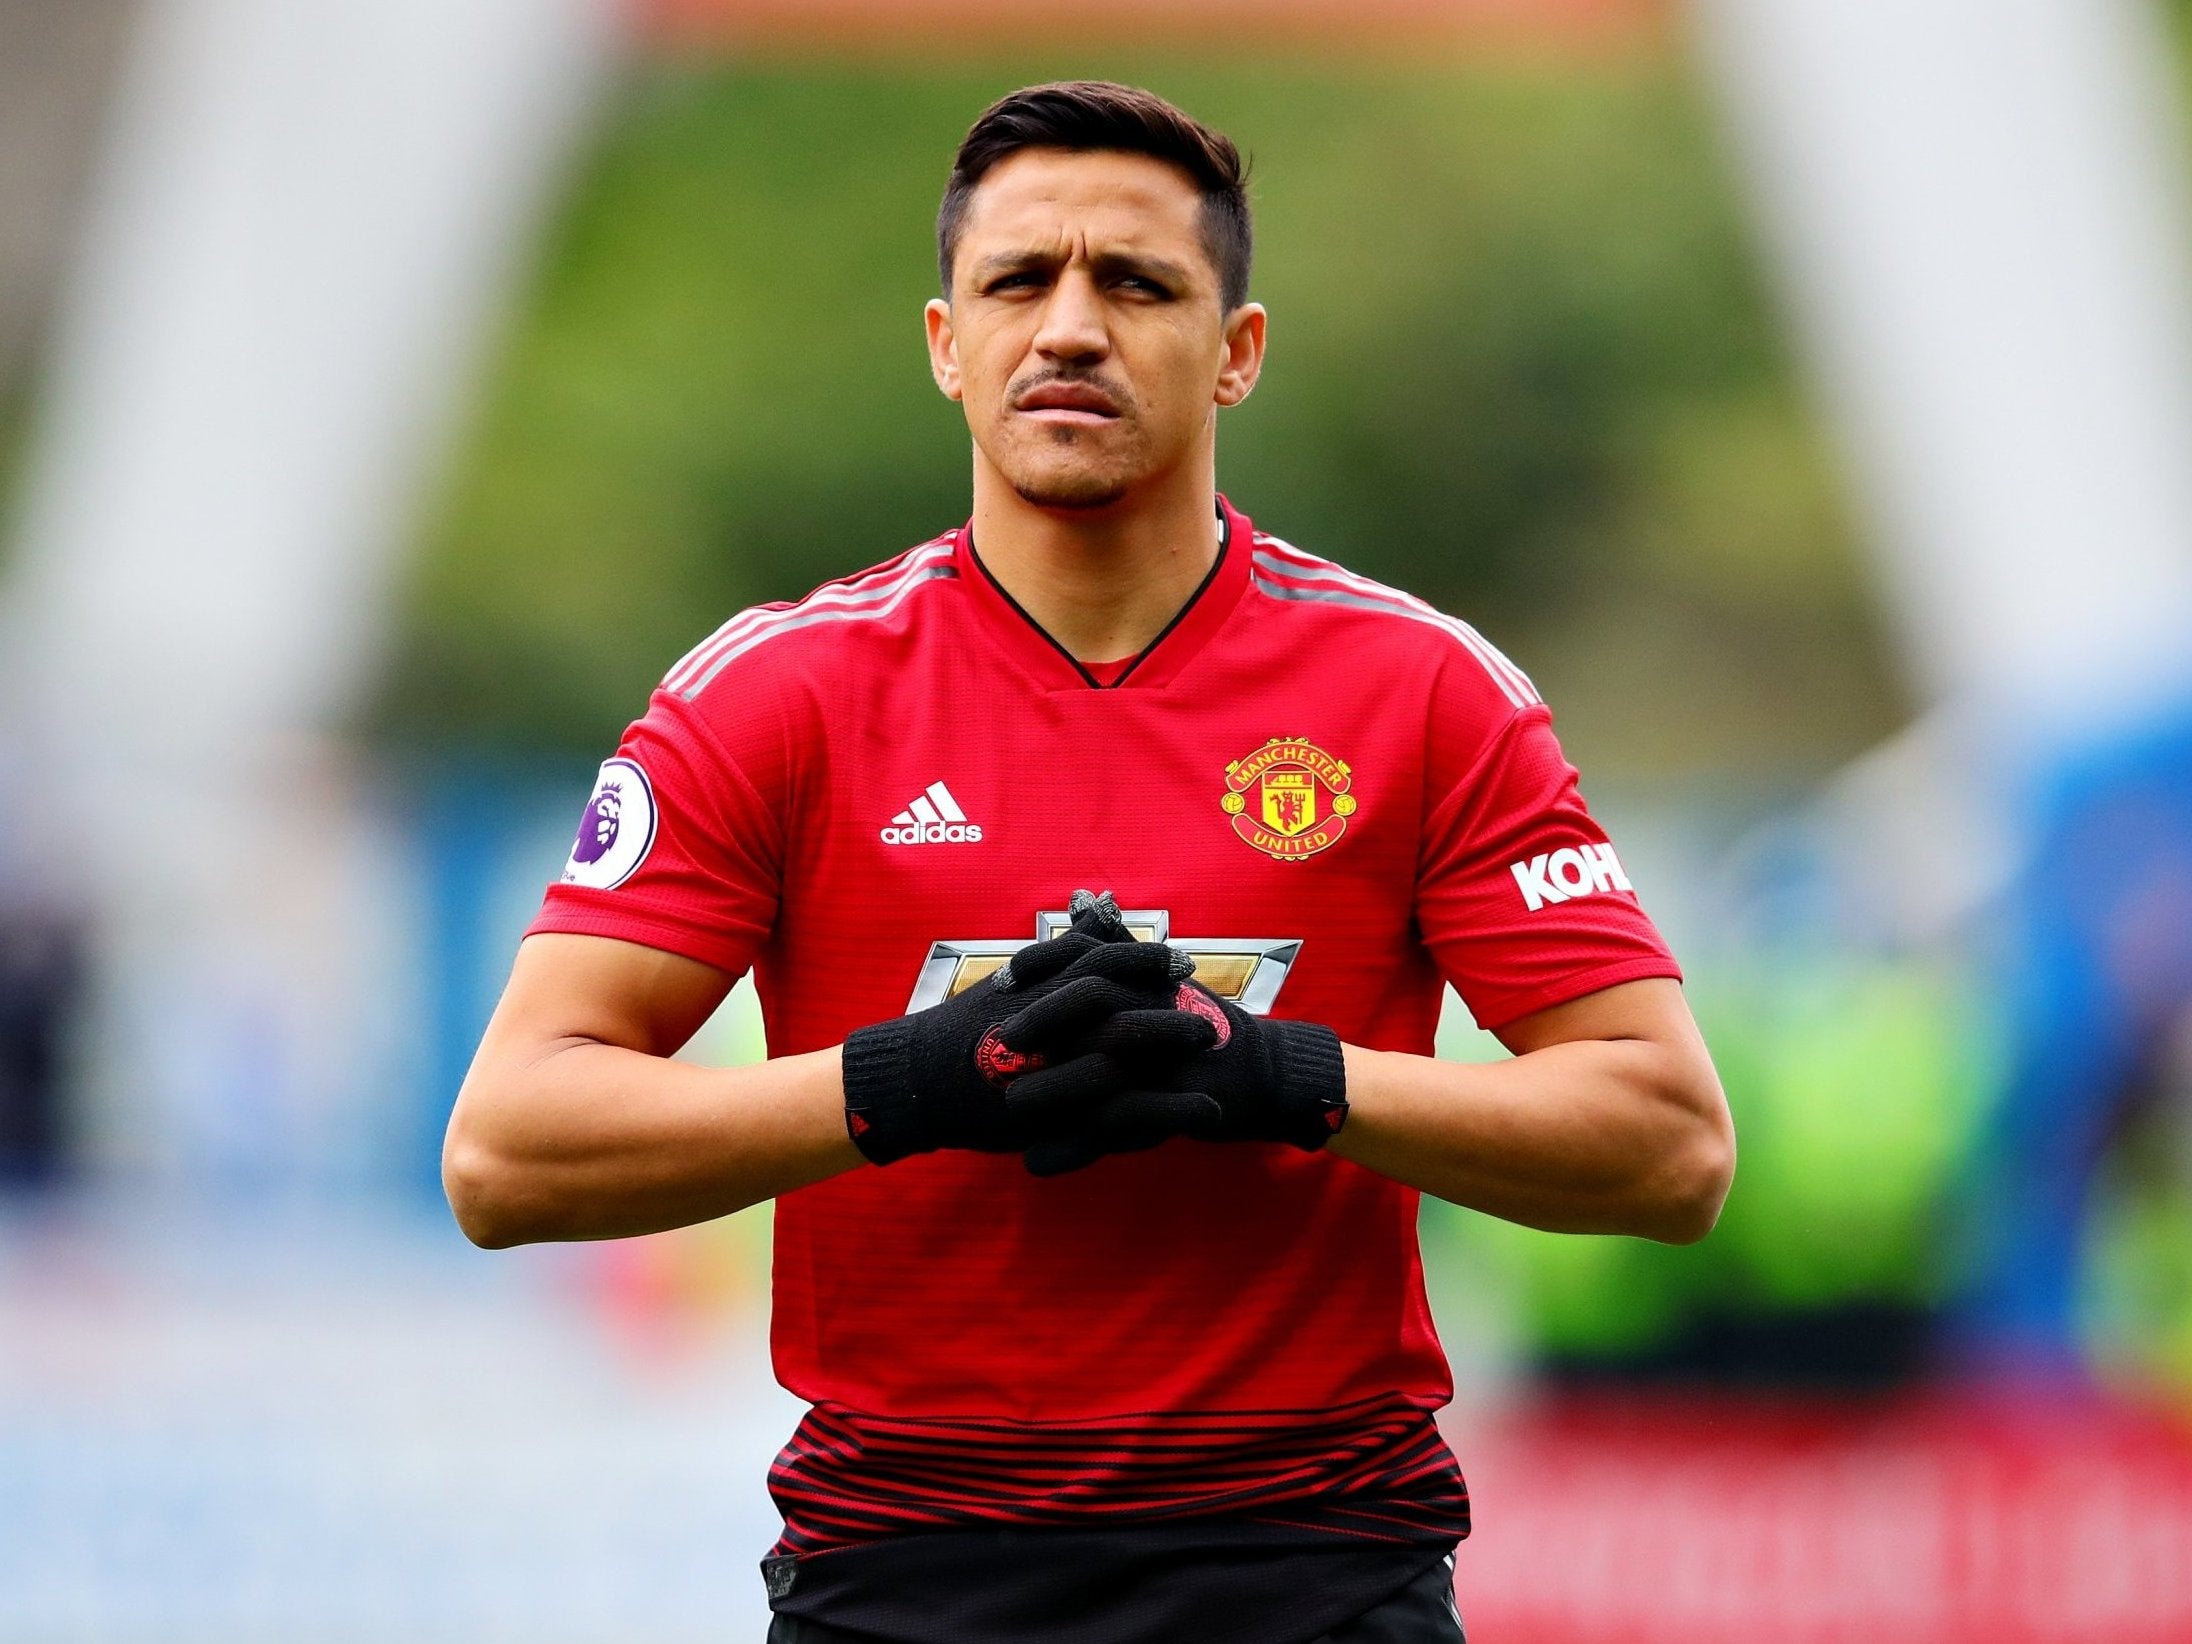 Alexis Sanchez could be an option for Manchester United up front